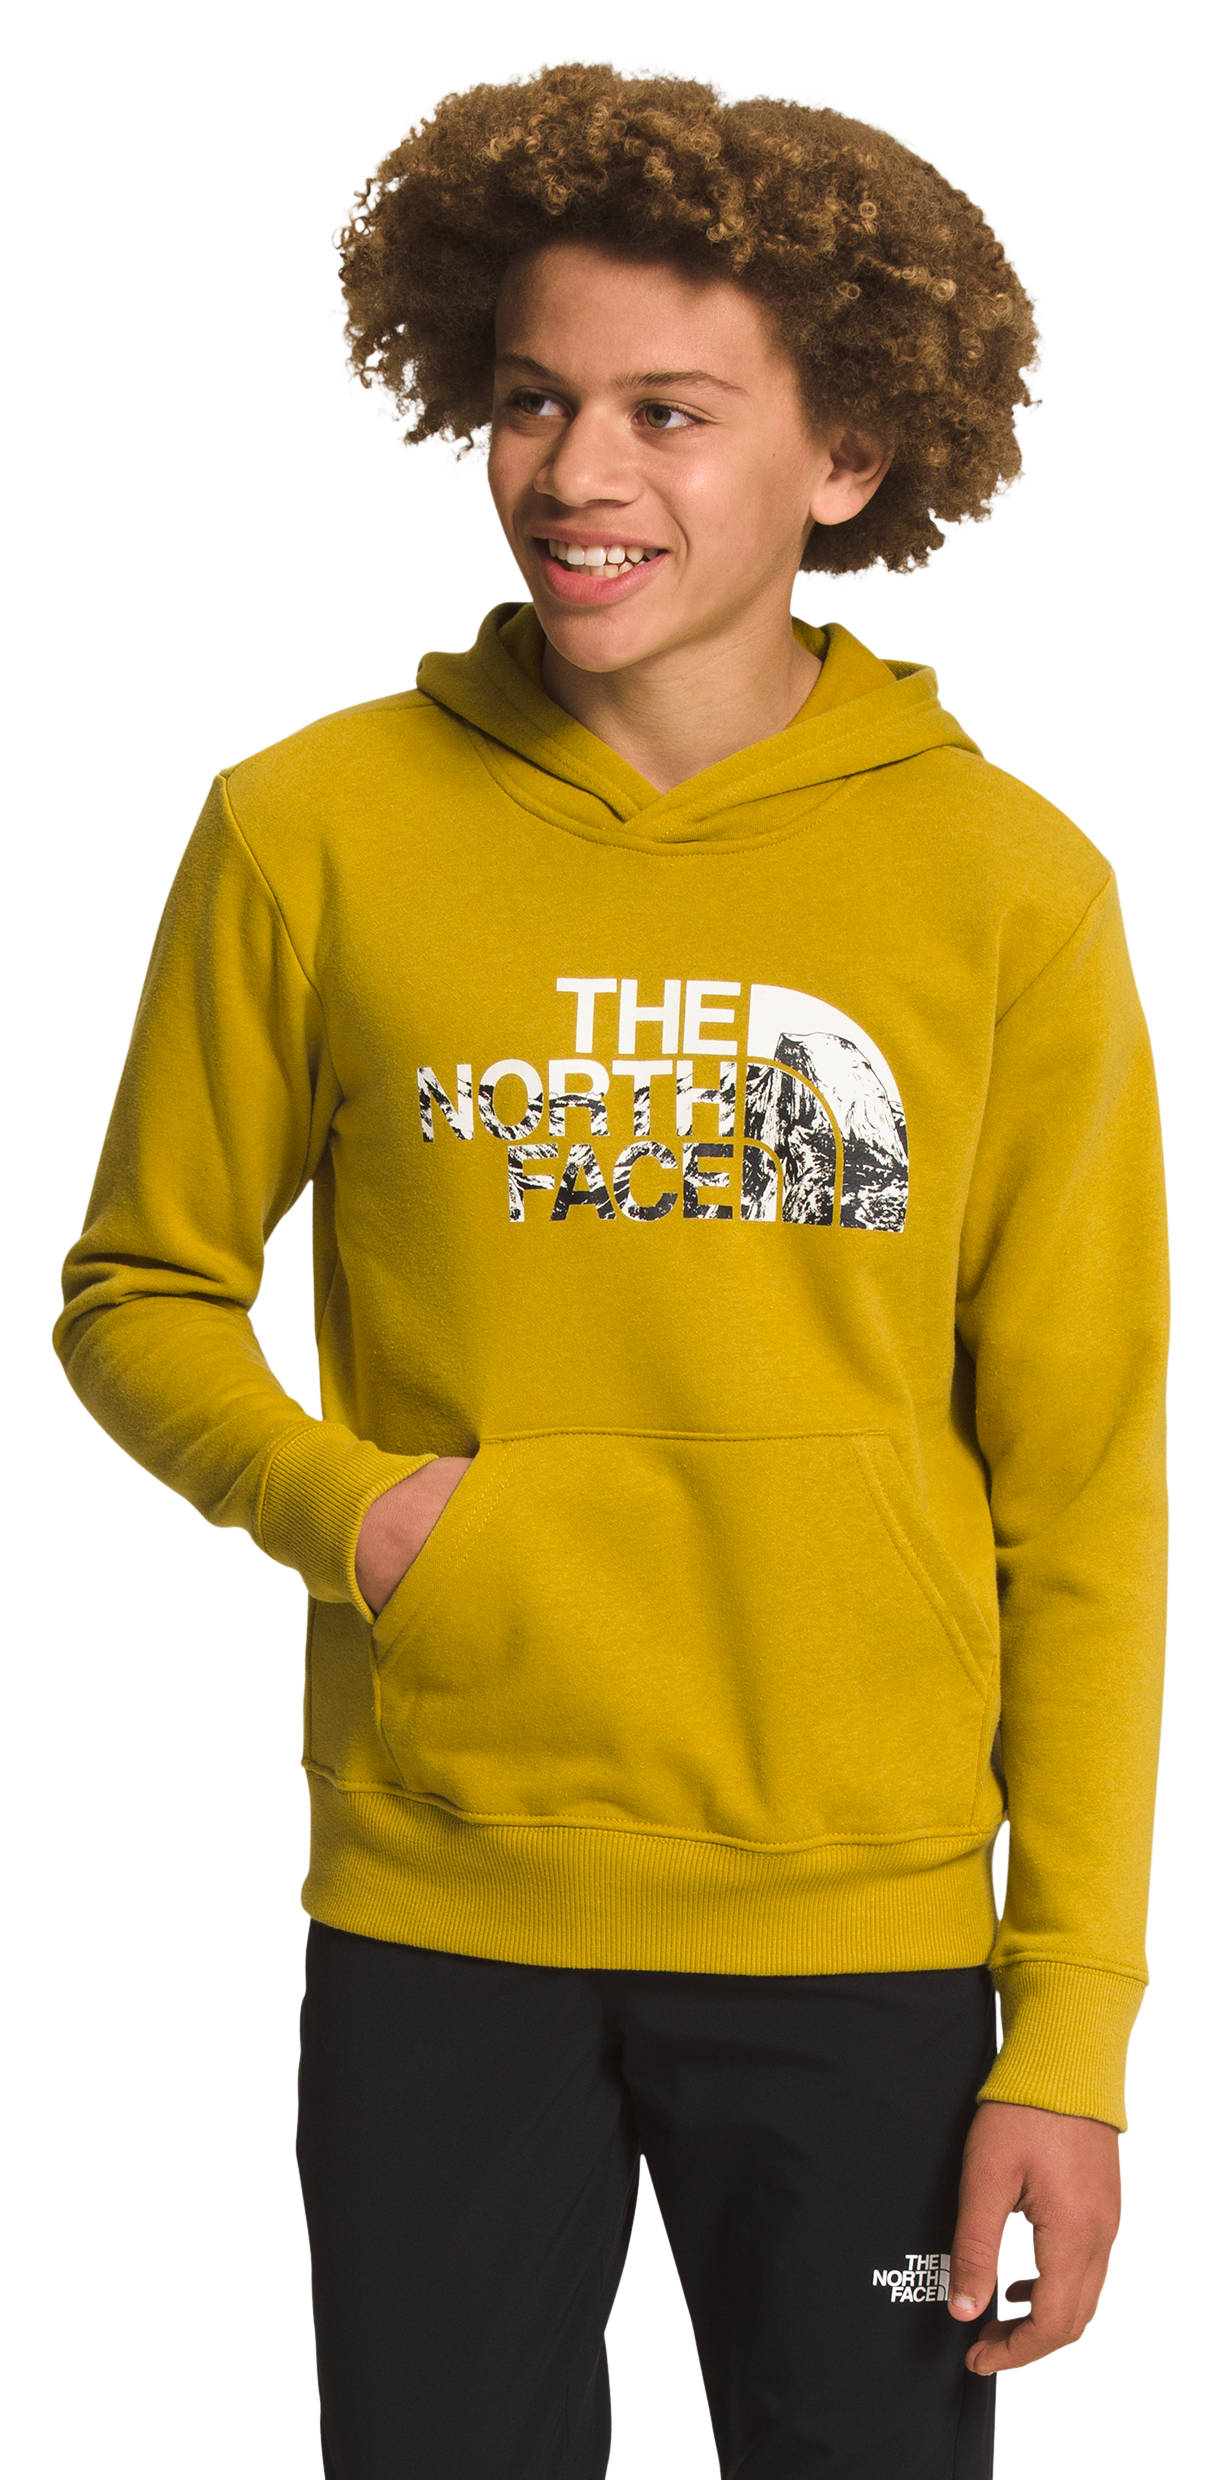 The North Face Camp Fleece Graphic Logo Long-Sleeve Hoodie for Boys - Mineral Gold - S